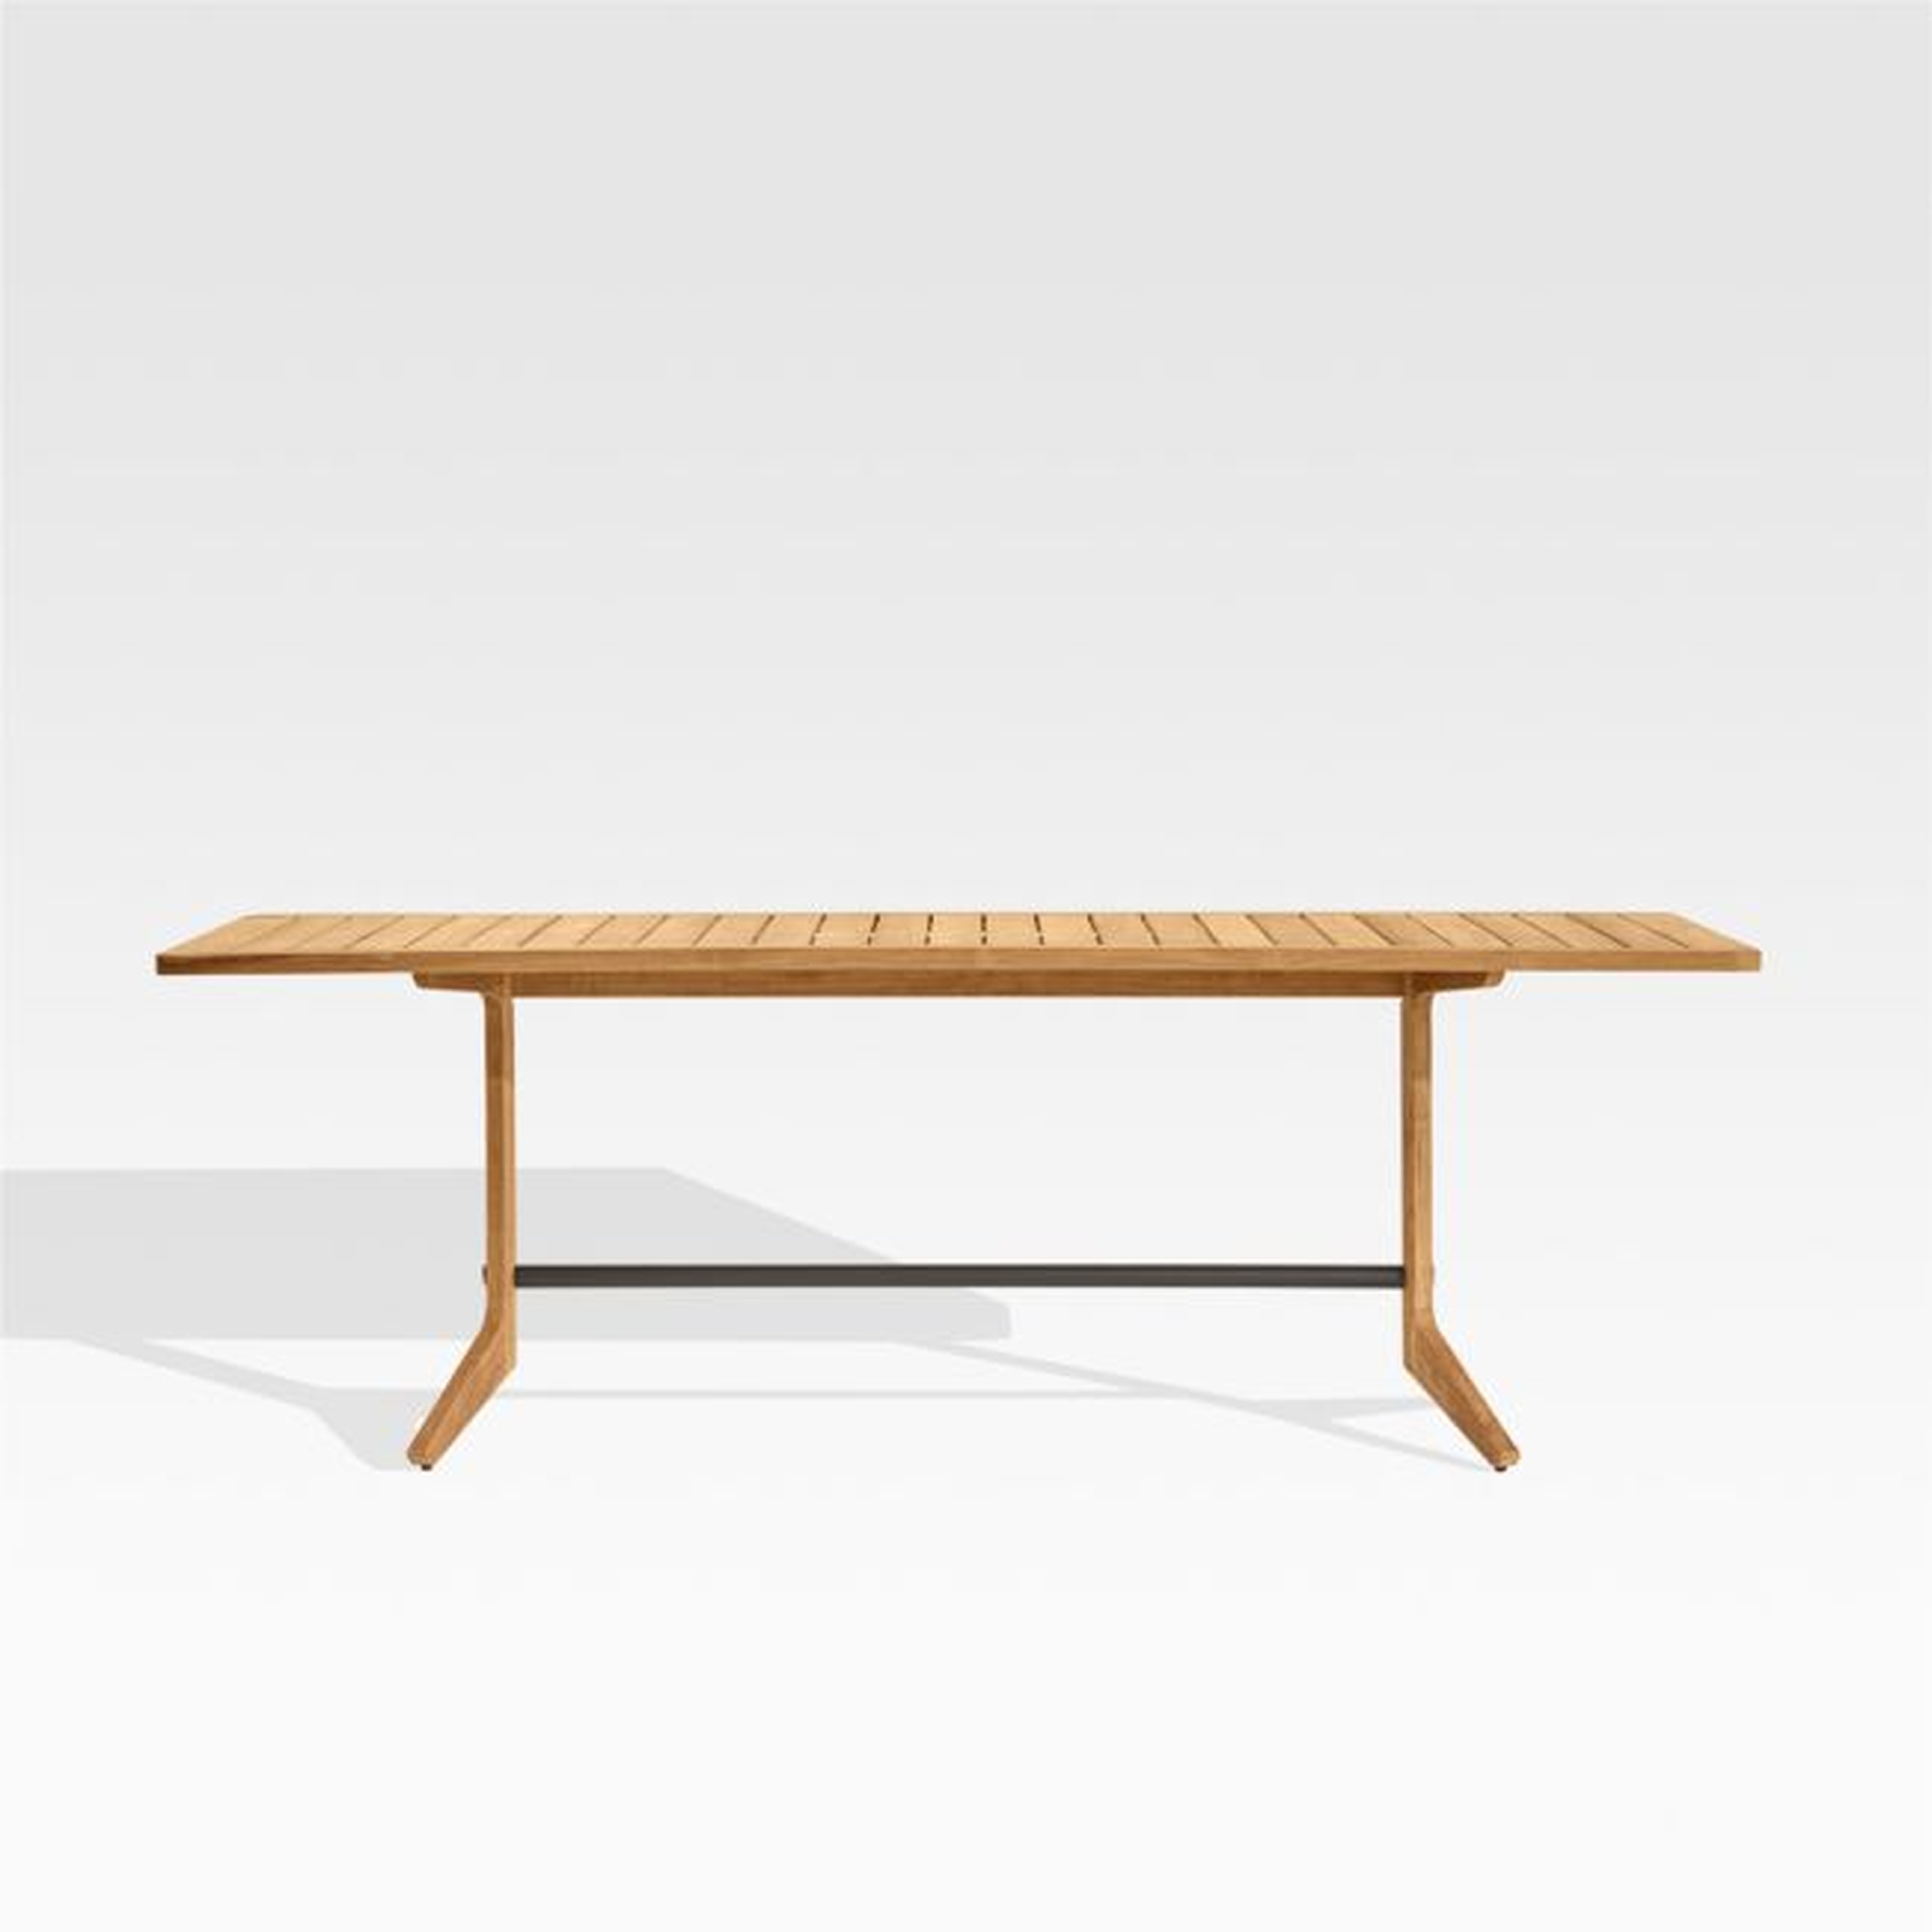 Kinney Teak Wood Outdoor Dining Table - Crate and Barrel